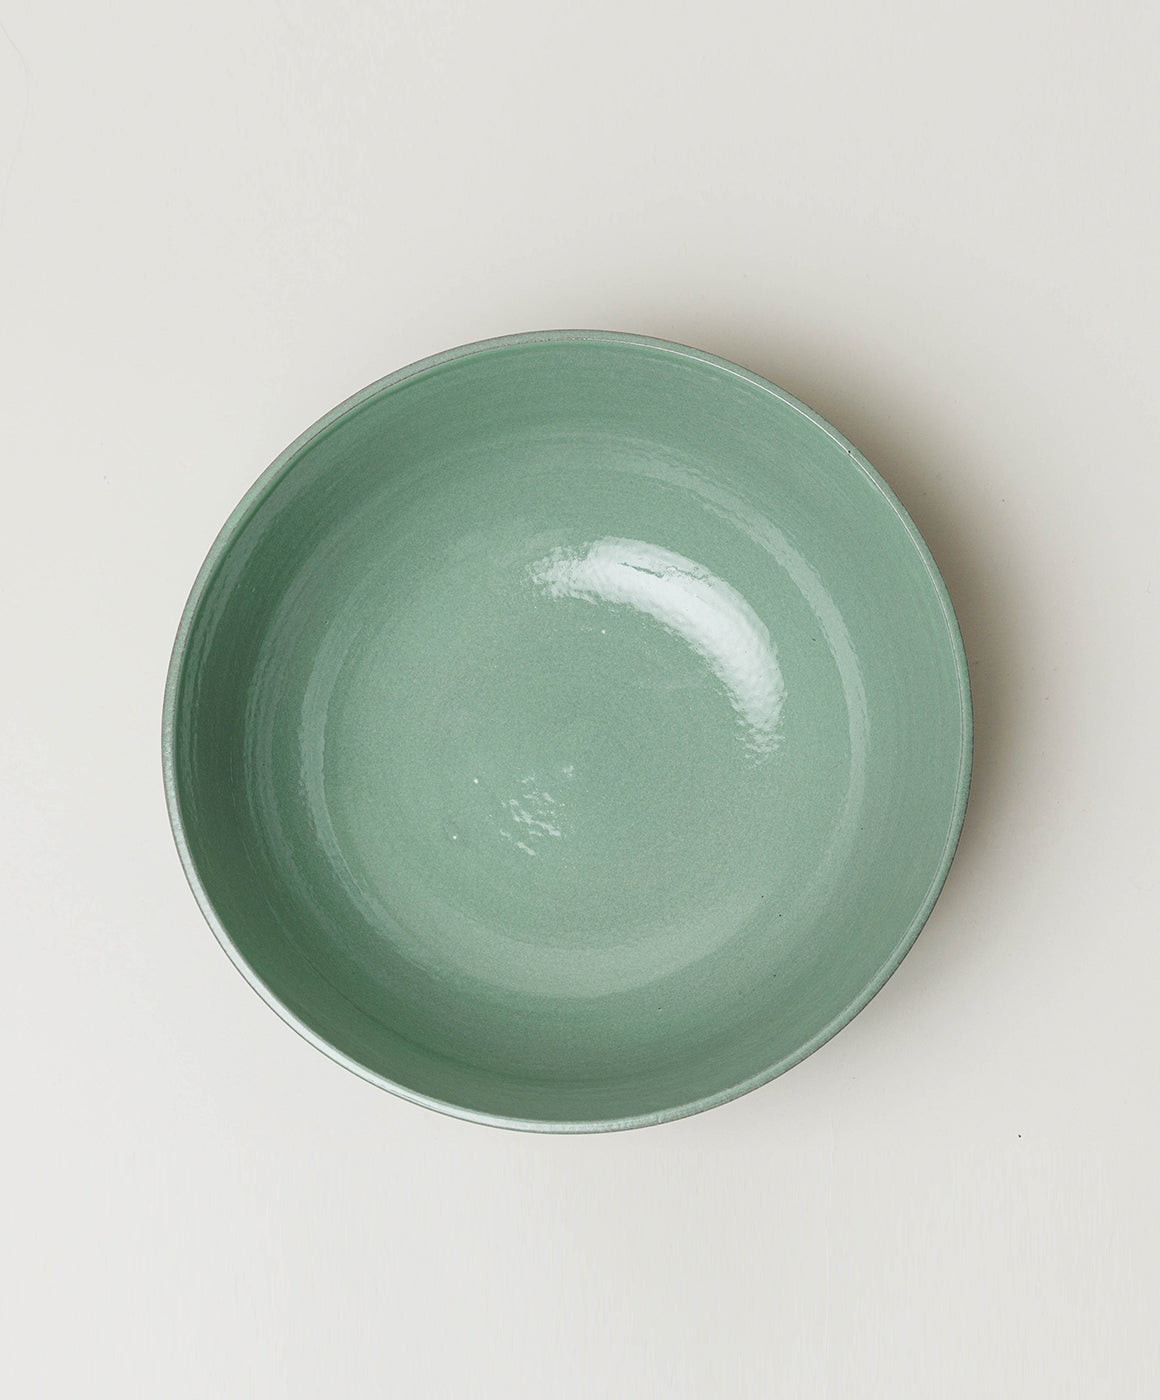   Small Round Serving Bowl  